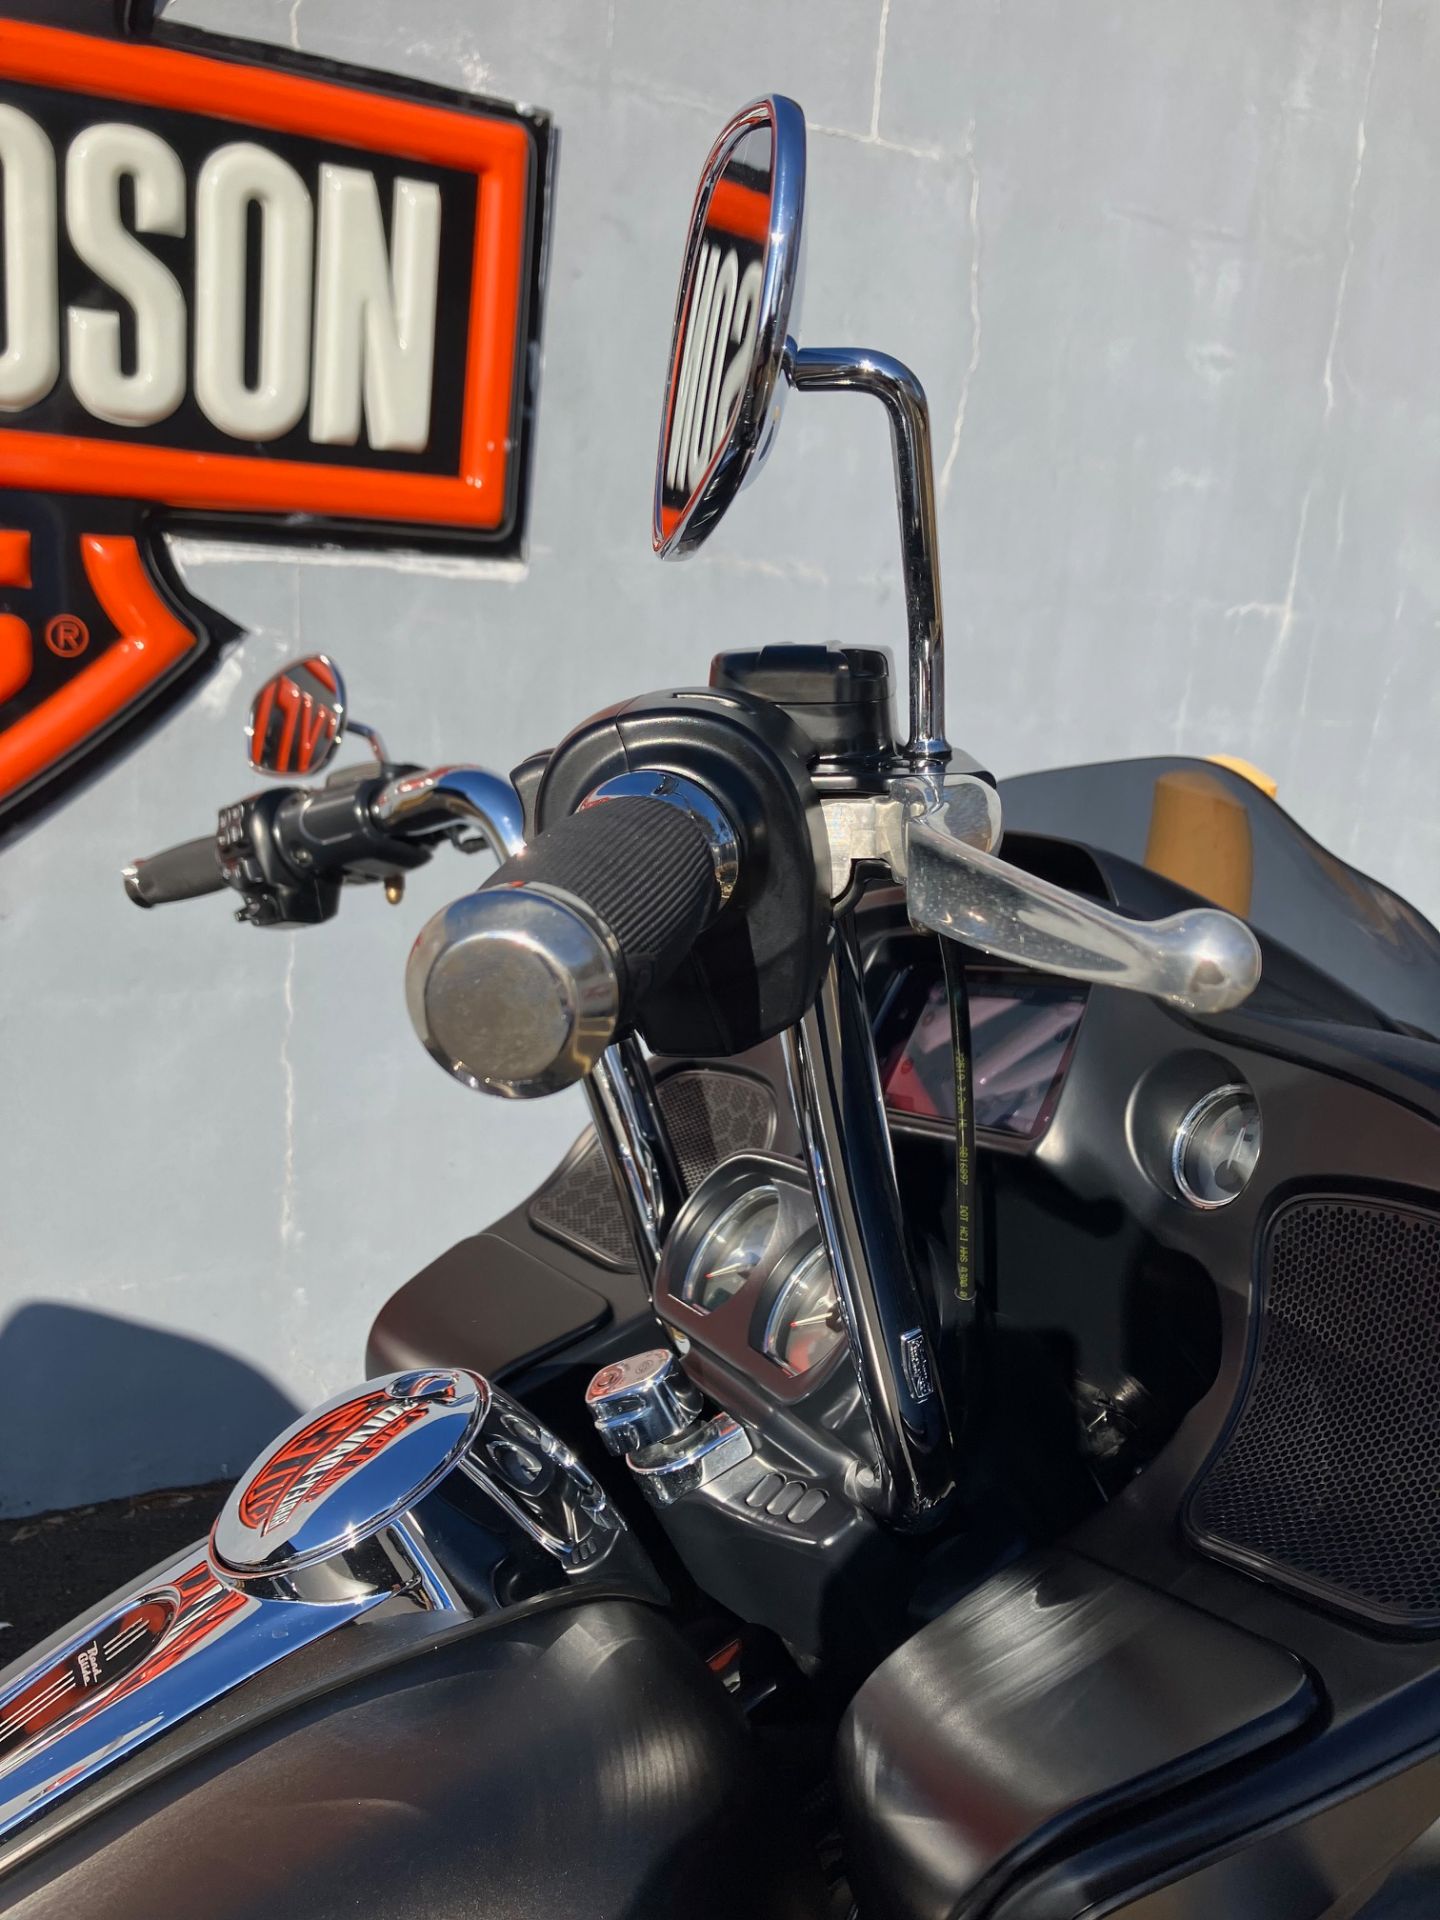 2020 Harley-Davidson ROAD GLIDE in West Long Branch, New Jersey - Photo 9